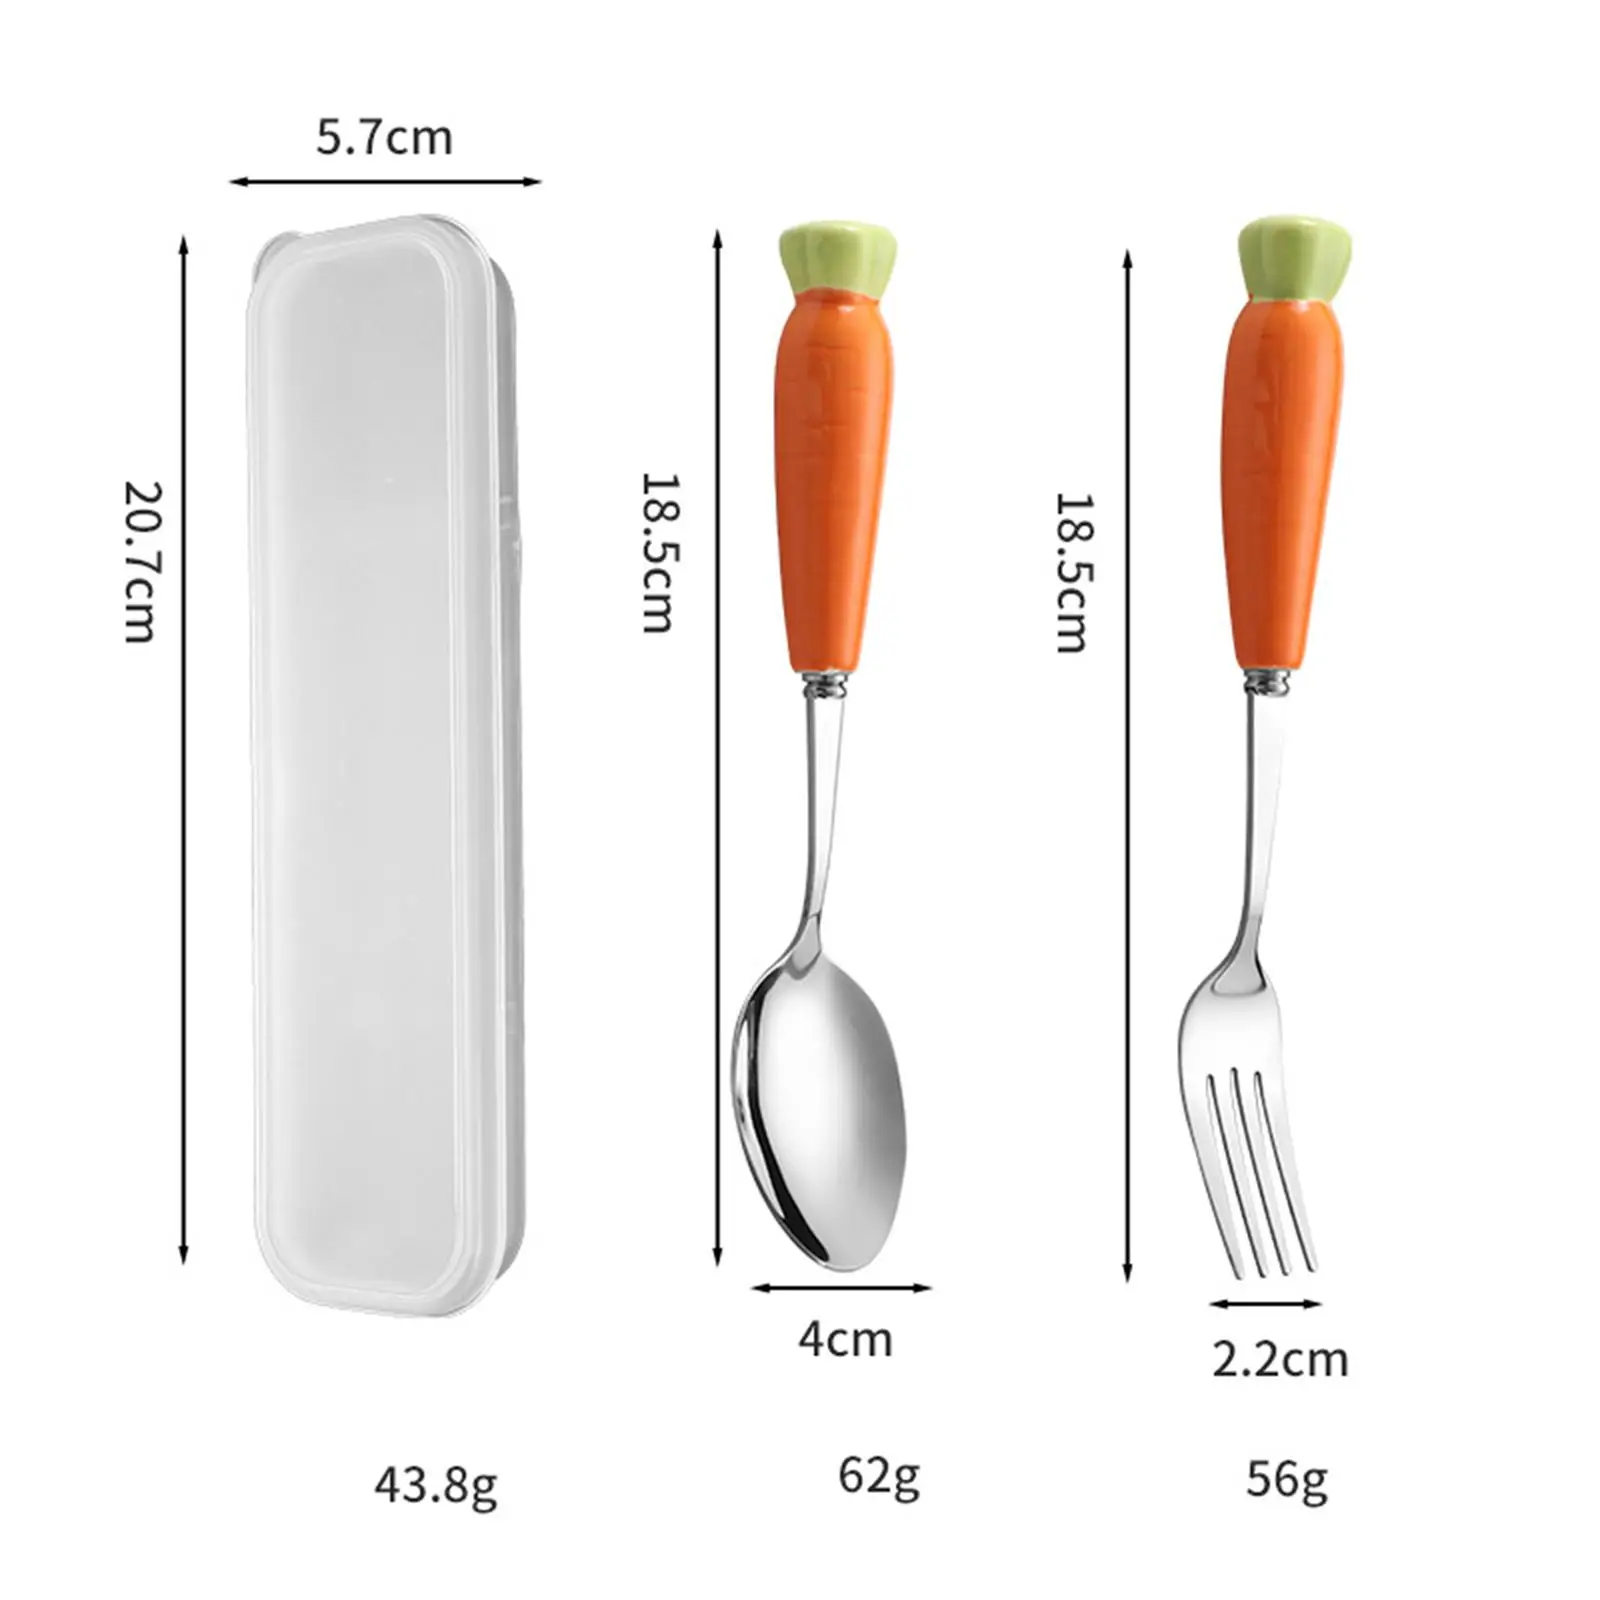 Spoon and Fork with Case Dessert Fork Spoon Tea Spoon 304 Stainless Steel Reusable for Kitchen Travel Office Camping Appetizers